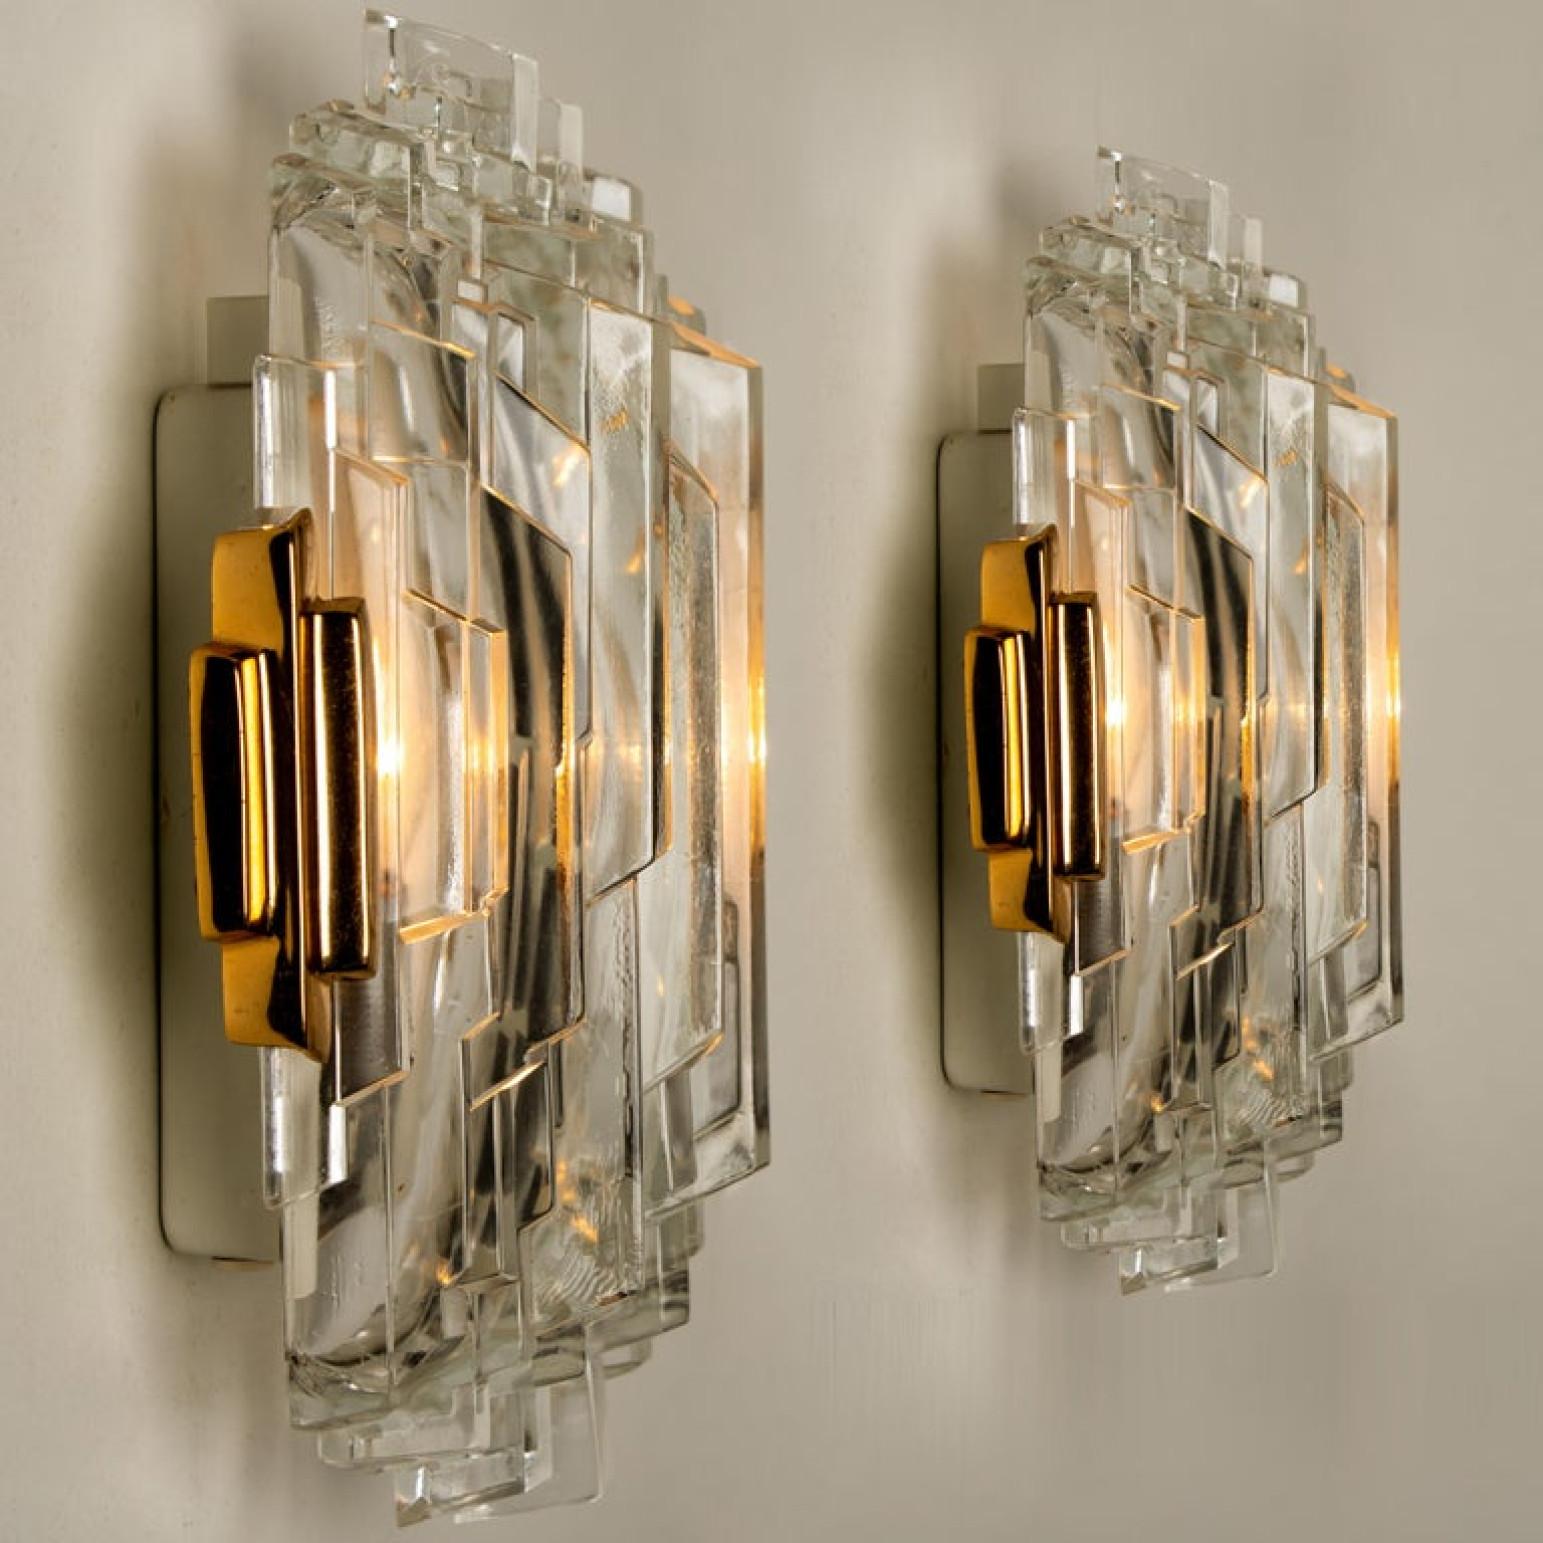 Pair of of Icicle Glass Wall Sconces /Lights, 1960s For Sale 3